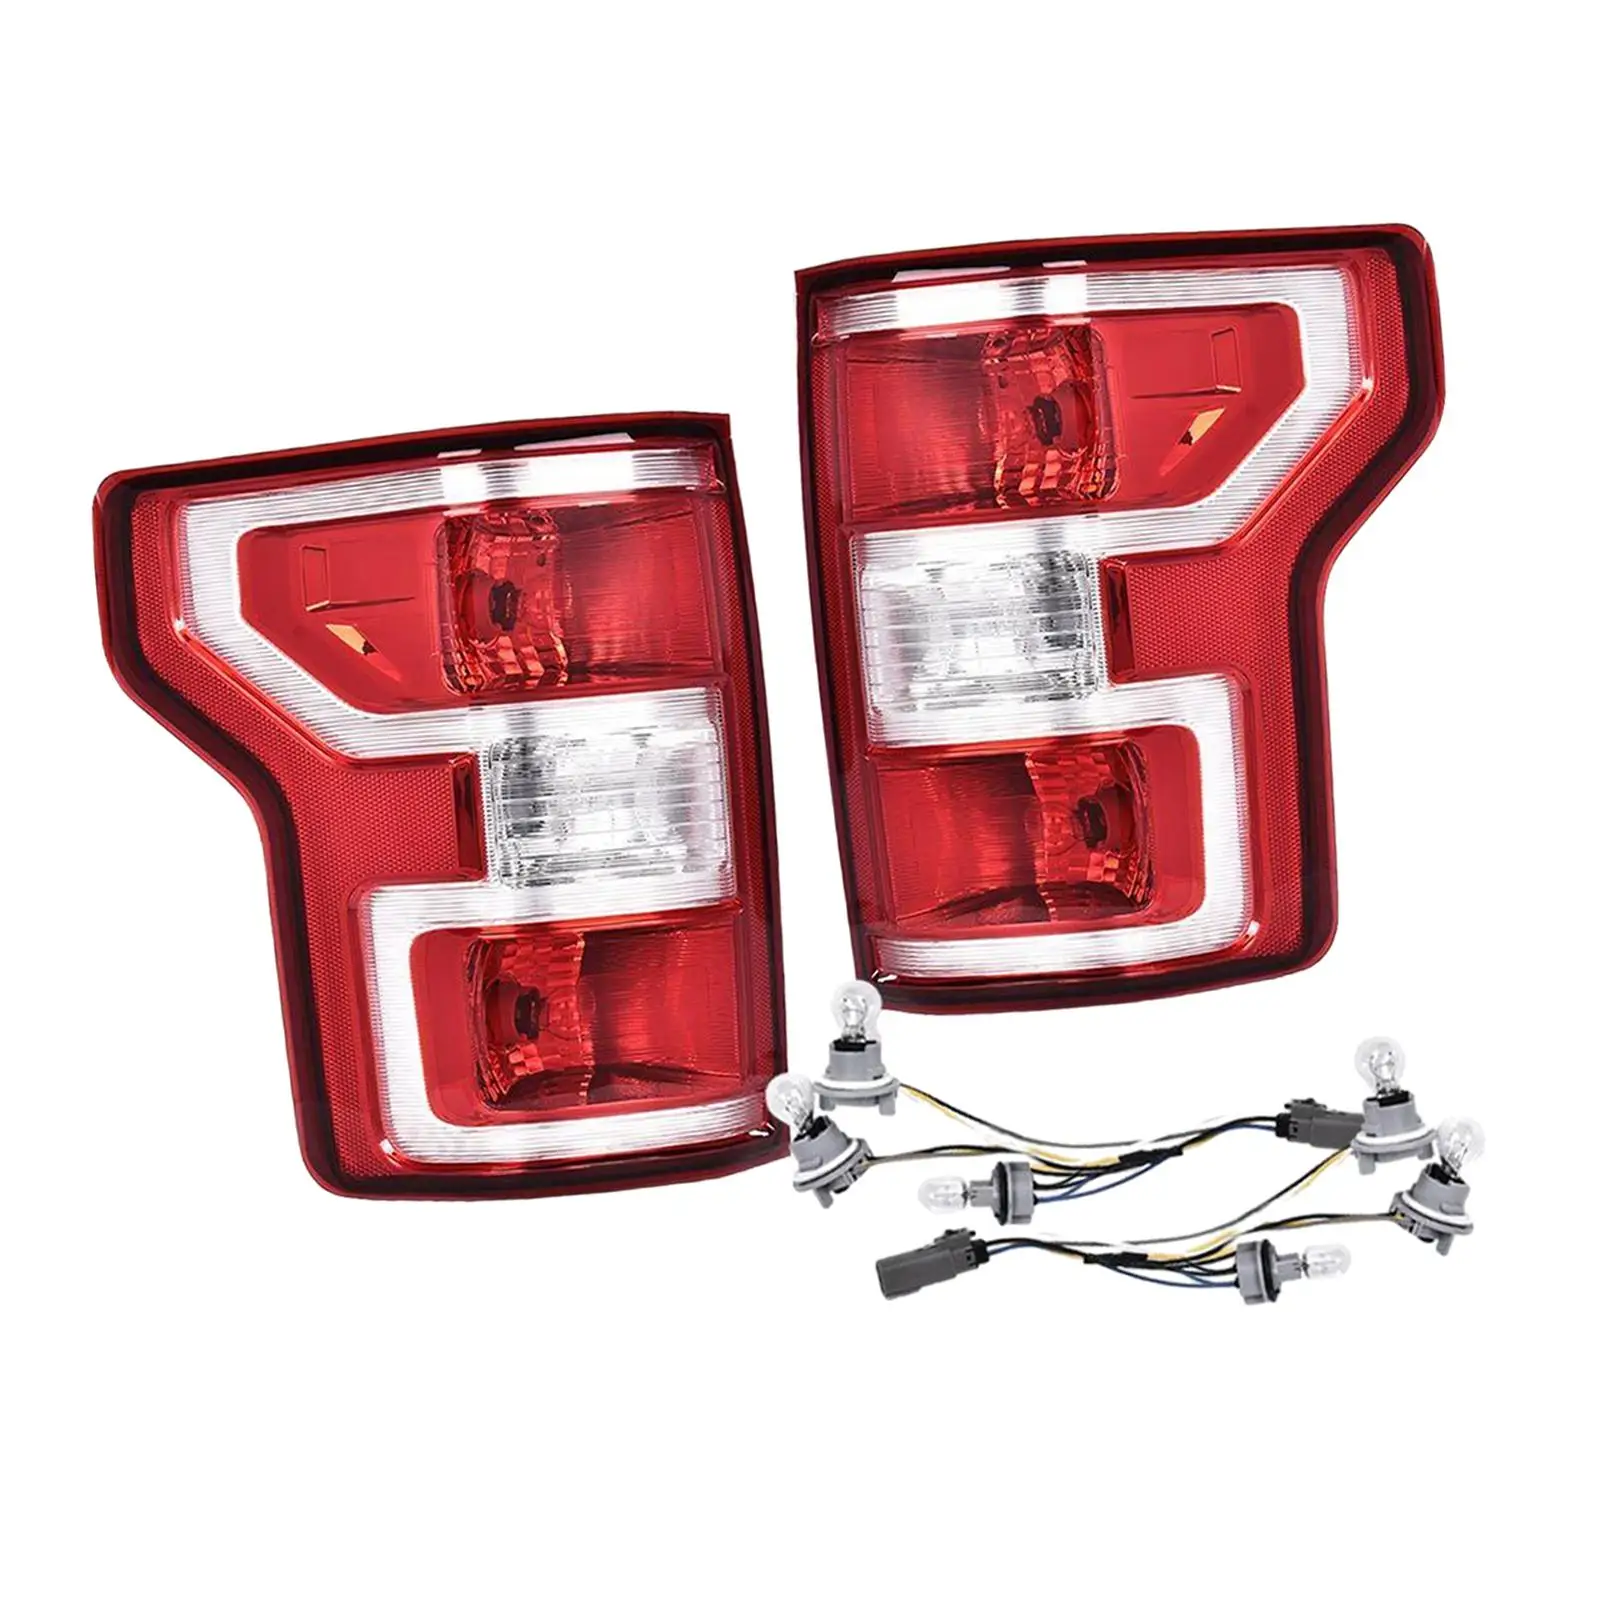 

2x Tail Light Assembly with Bulbs Replace Taillight for Ford F150 F-150 Pickup 2018-2020 Auto Accessories Easy Installation